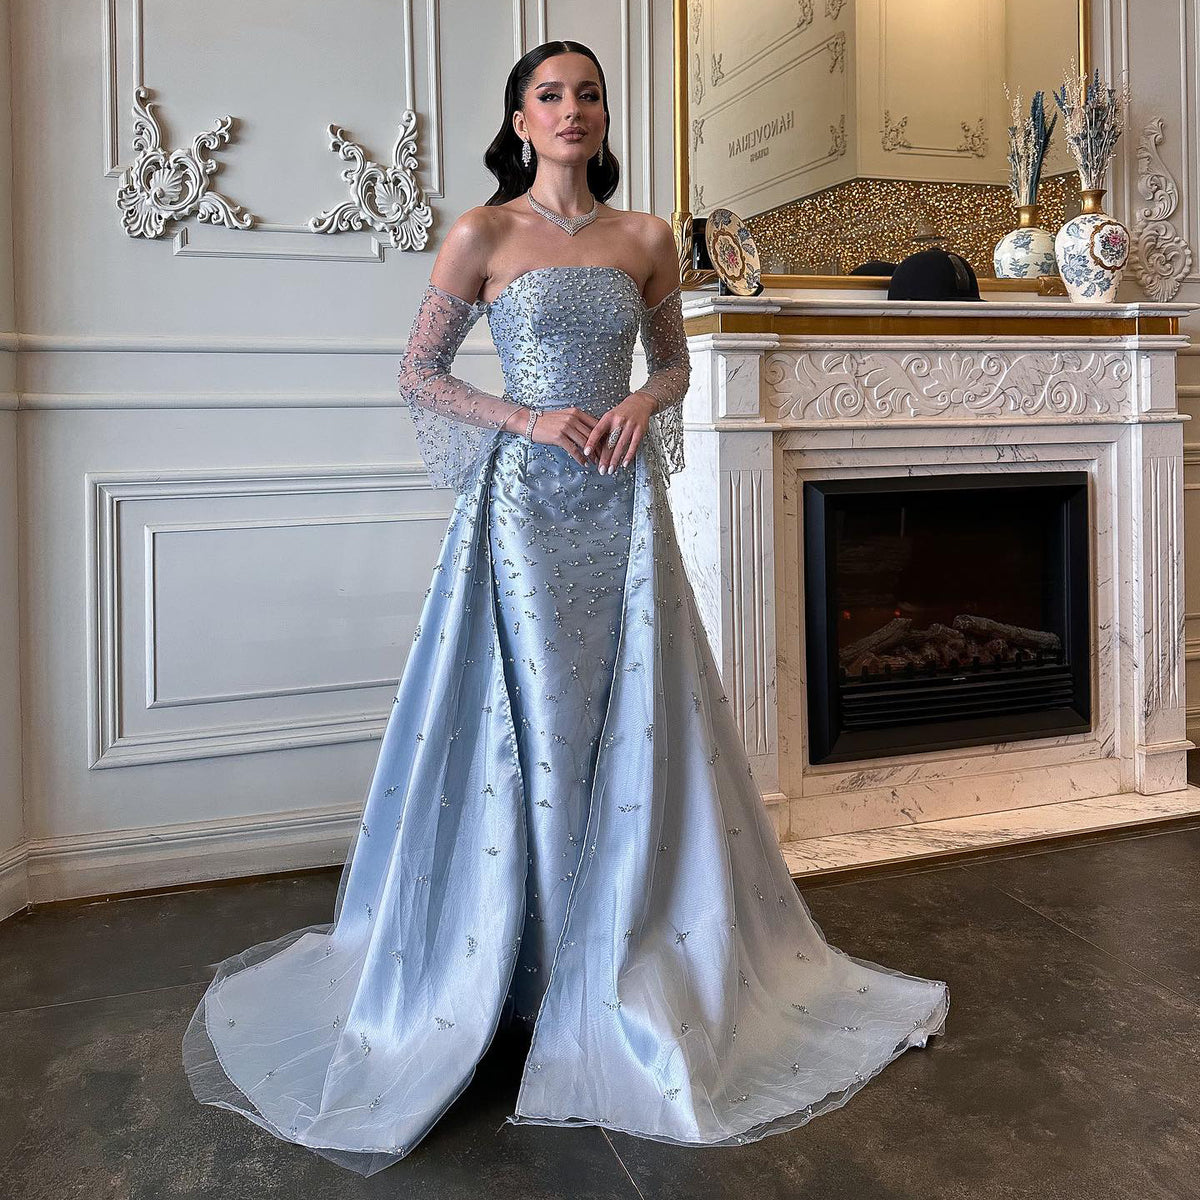 Sharon Said Arabic Silver Gray Luxury Dubai Evening Dress with Overskirt Sleeves Woman Wedding Party Elegant Prom Formal Gowns SS484